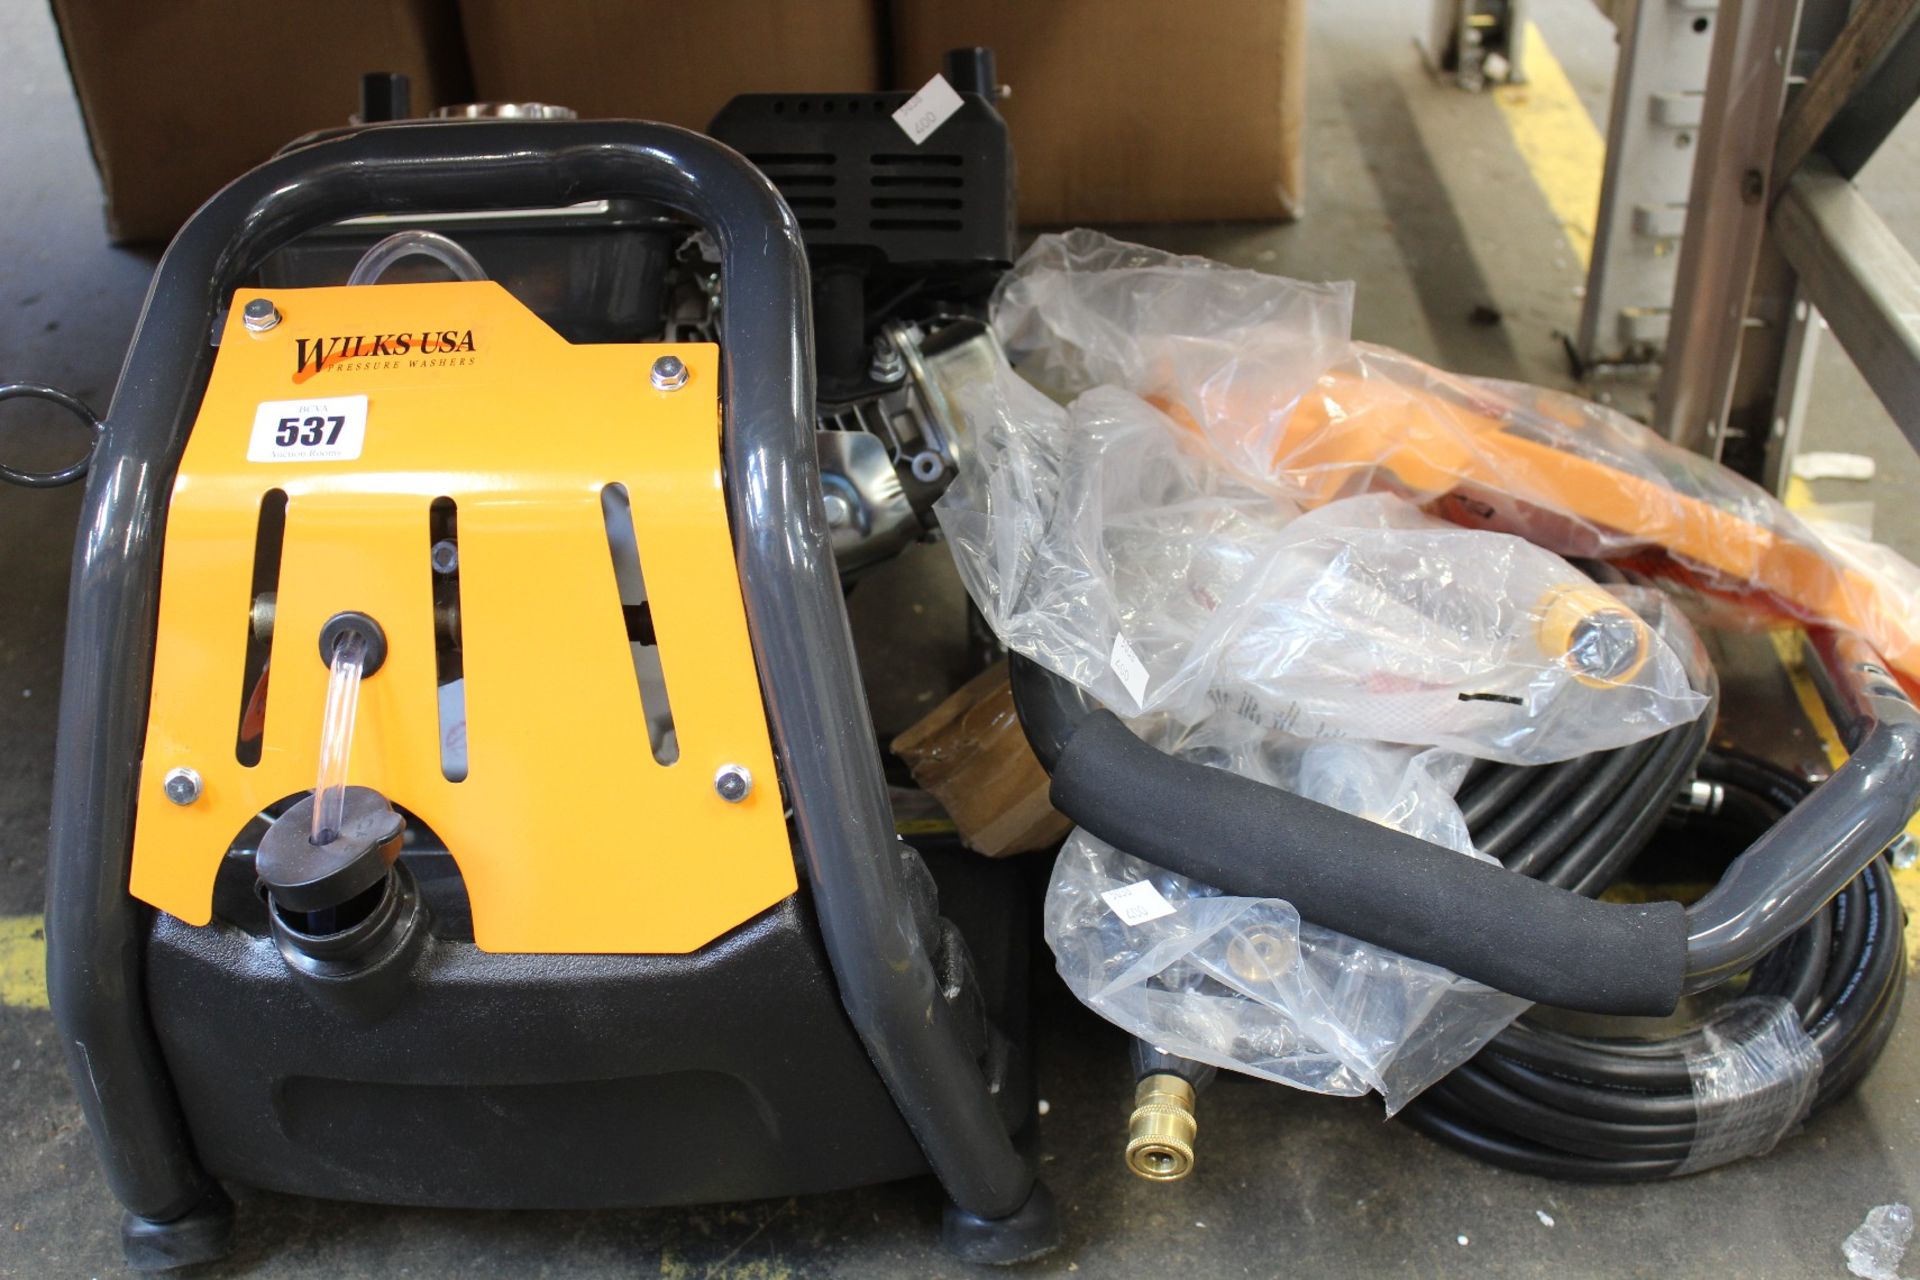 A Wilks USA TX750i pressure washer (Item may be incomplete, viewing recommended).